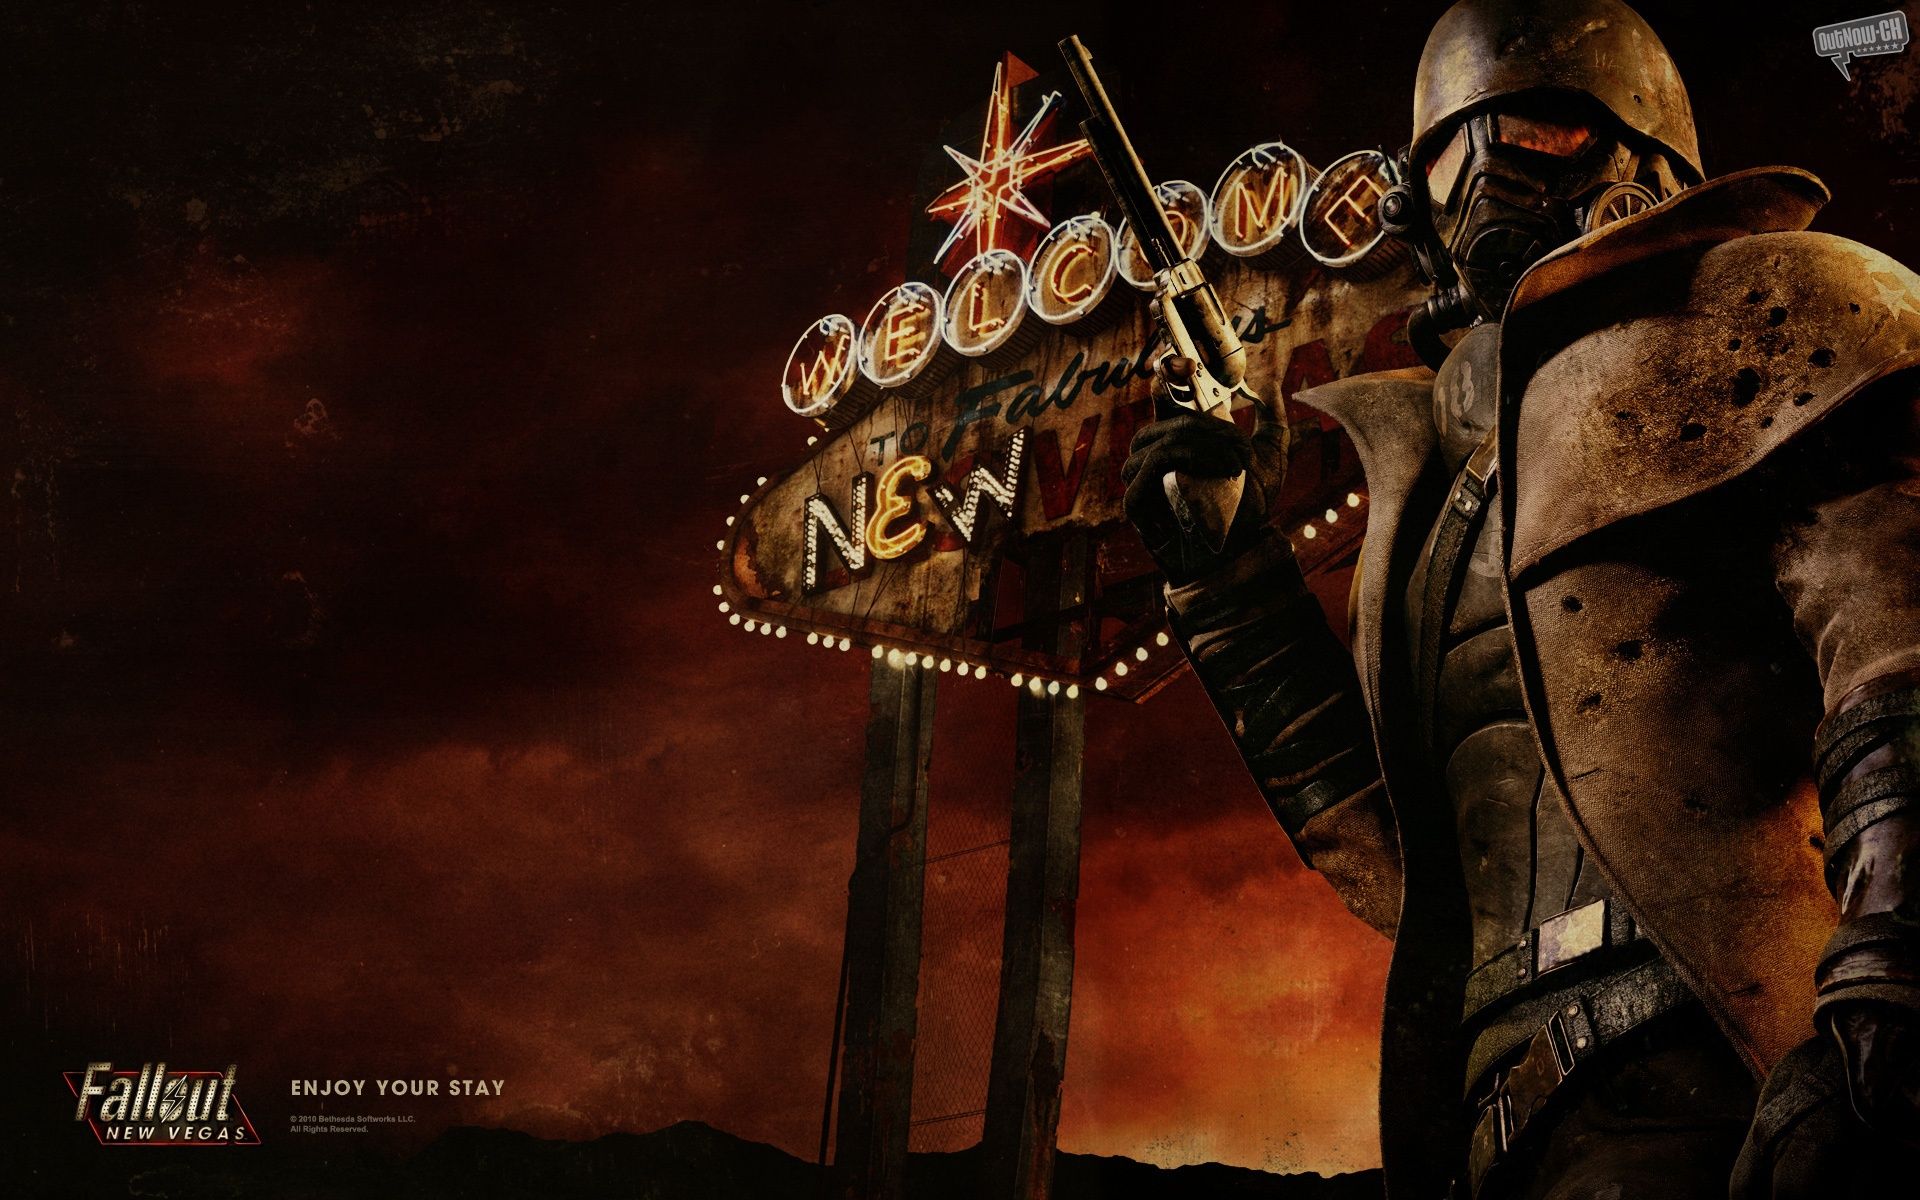 Enjoy Your Stay Fallout New Vegas Games Storybooks And More